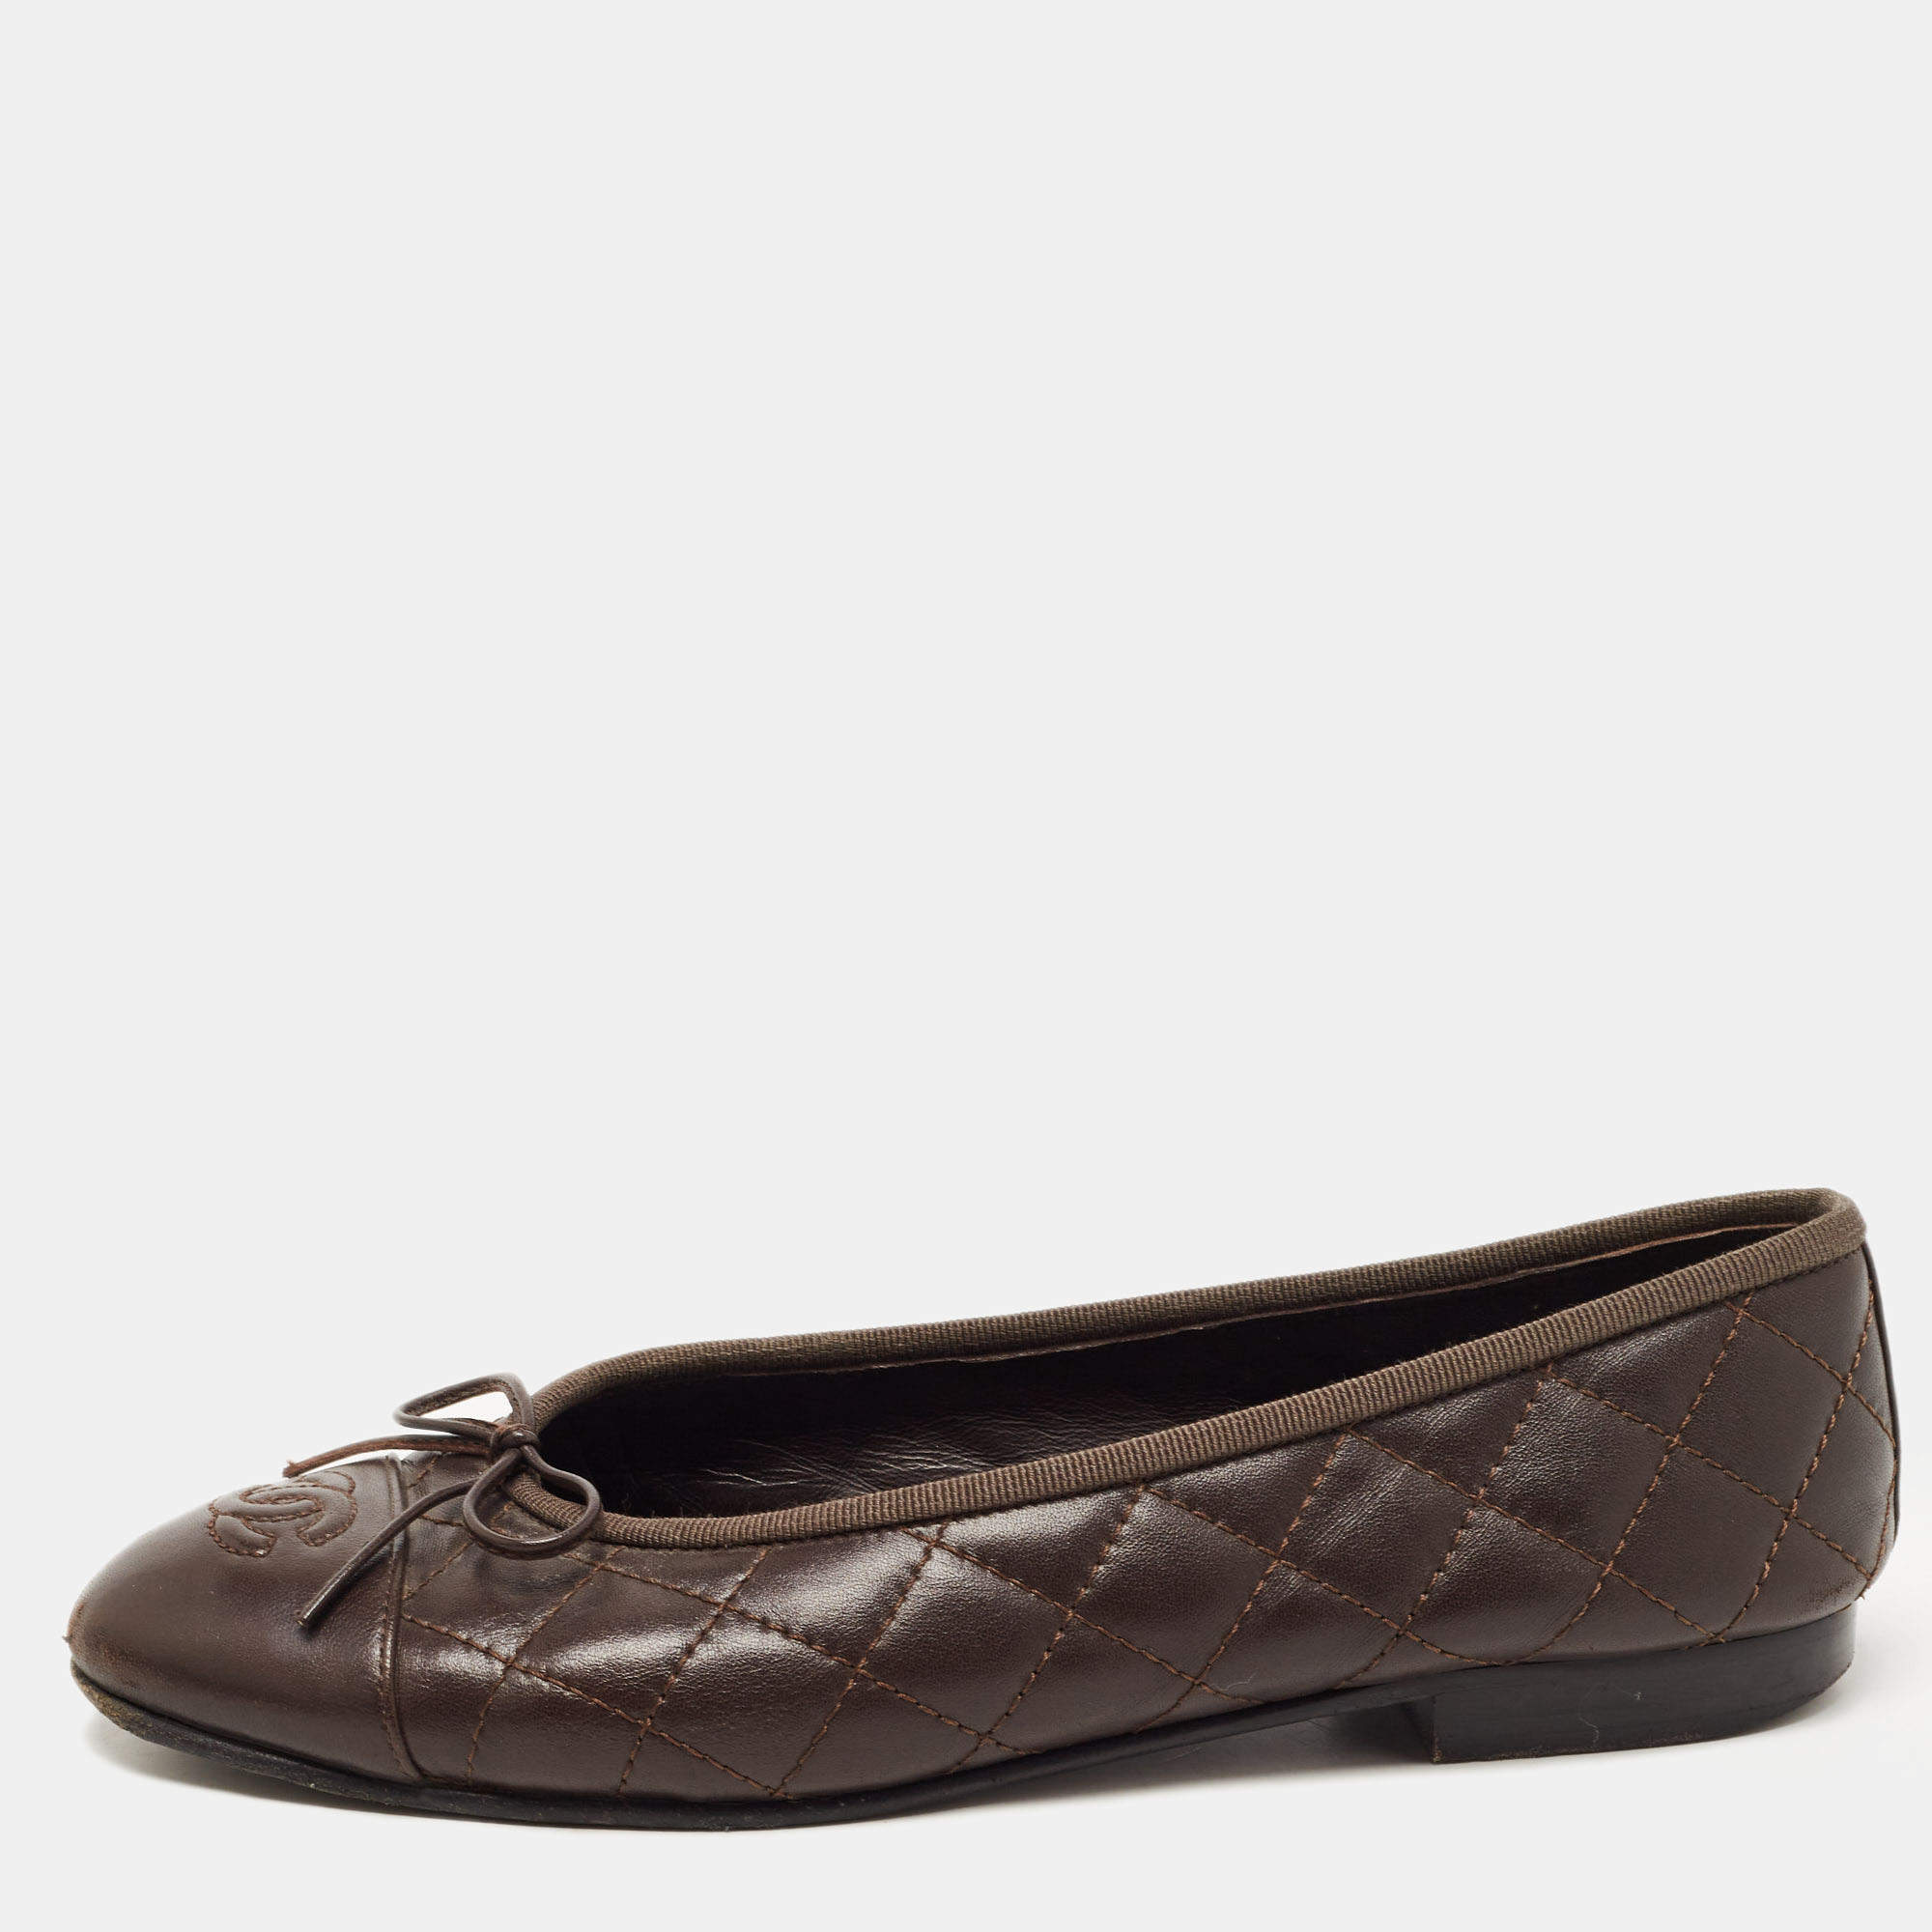 Leather CC Chanel Dark Size Brown Flats | Chanel TLC Ballet Quilted Bow 37.5